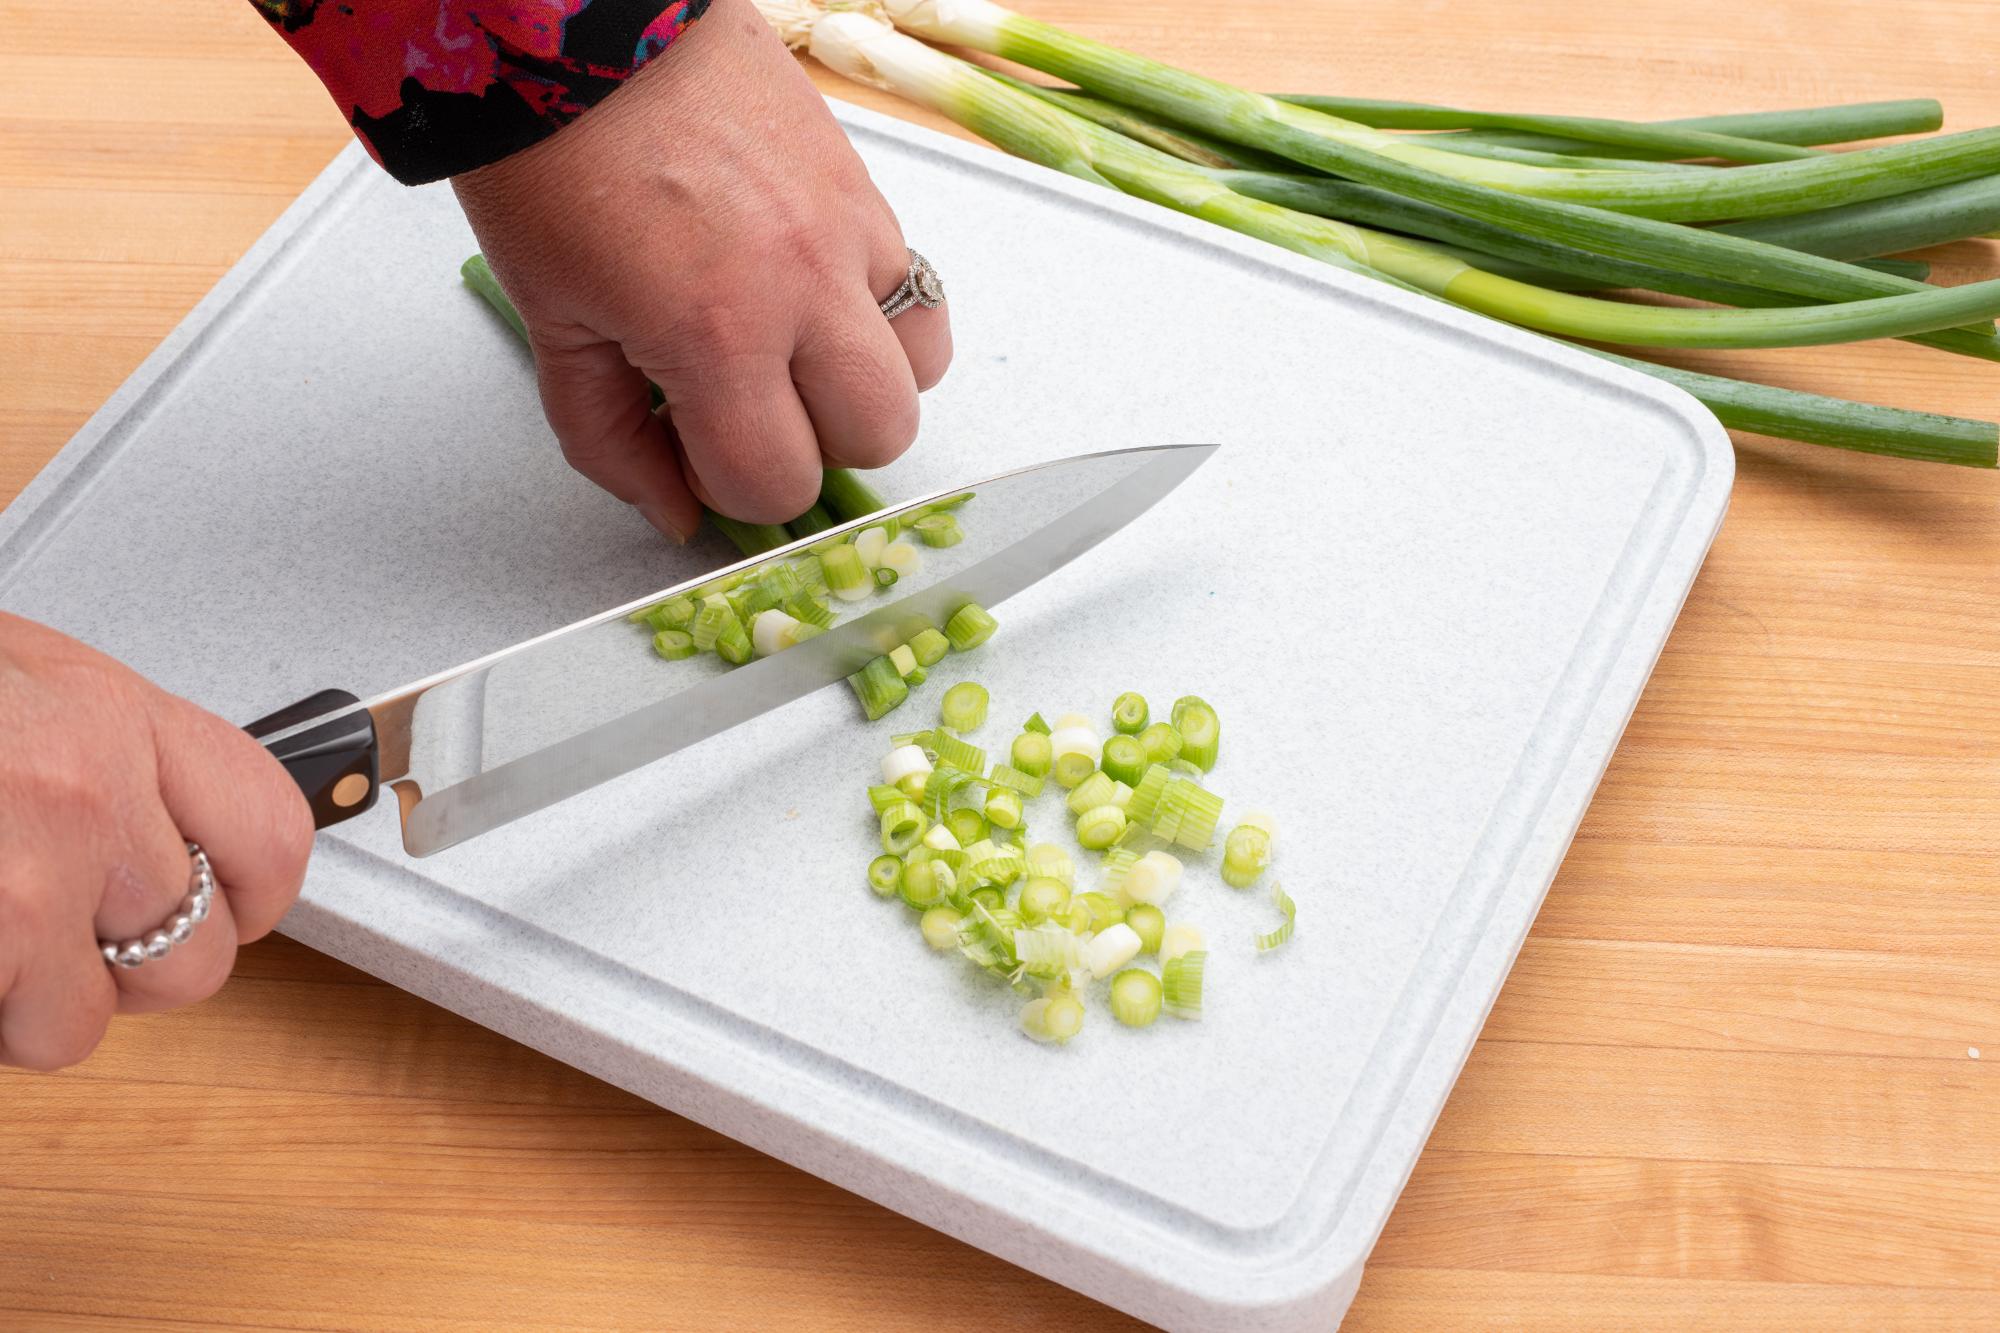 Using a Petite Chef to slice the green onions.